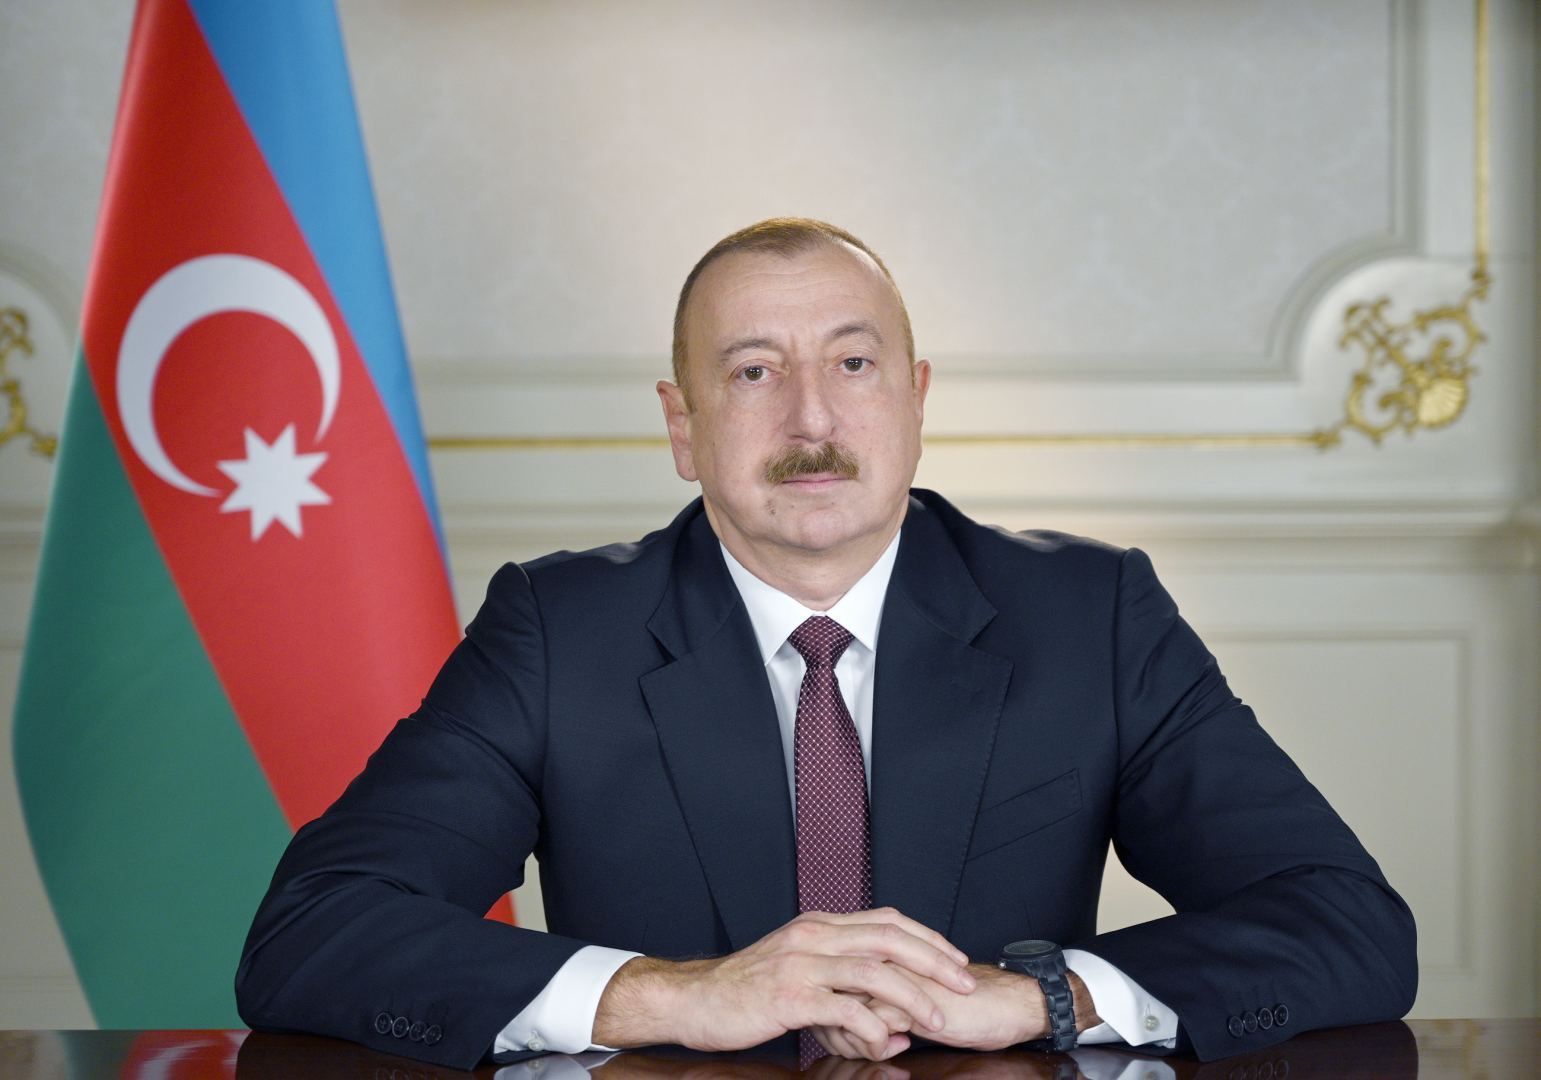 Group of people awarded for active participation in public-political life of Azerbaijan - decree